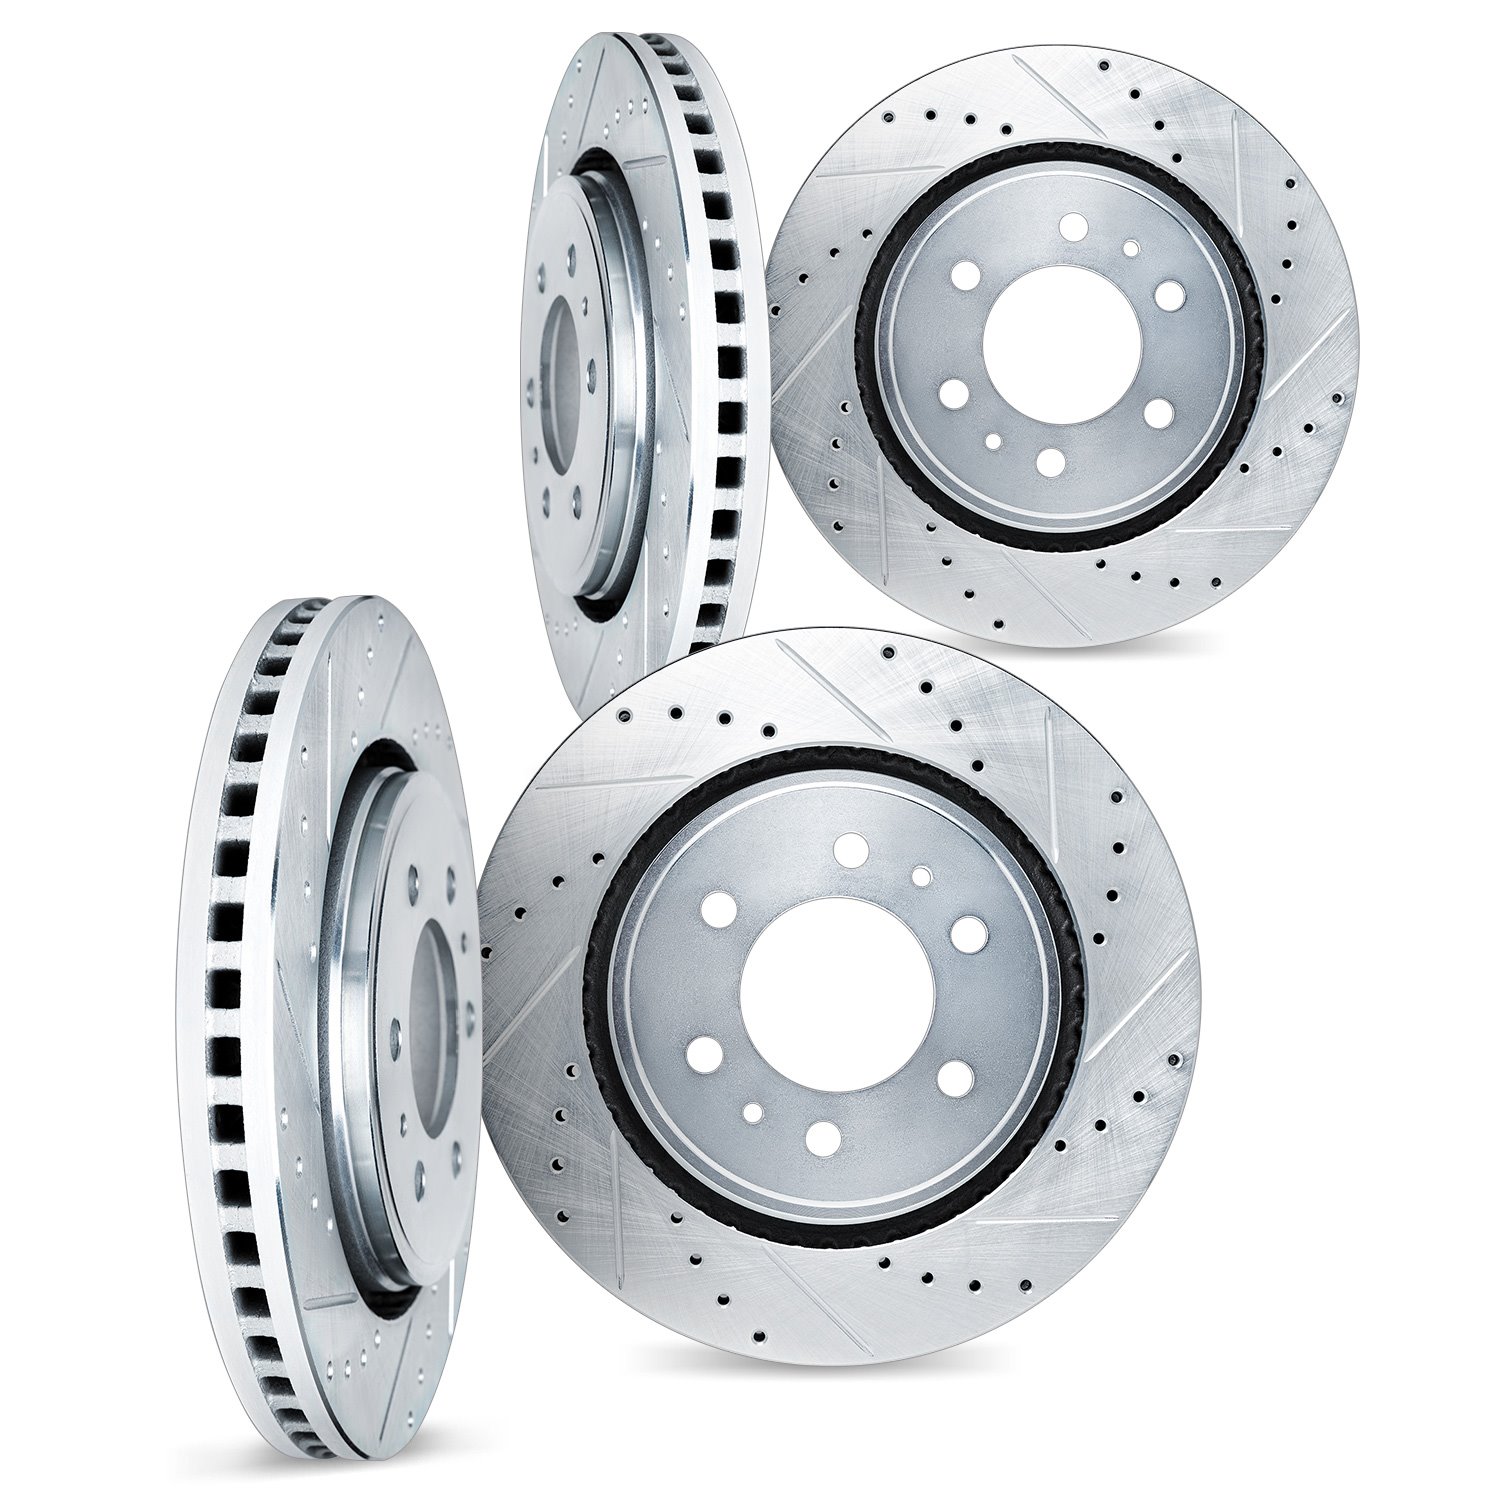 Drilled/Slotted Brake Rotors [Silver], 2003-2009 Lexus/Toyota/Scion